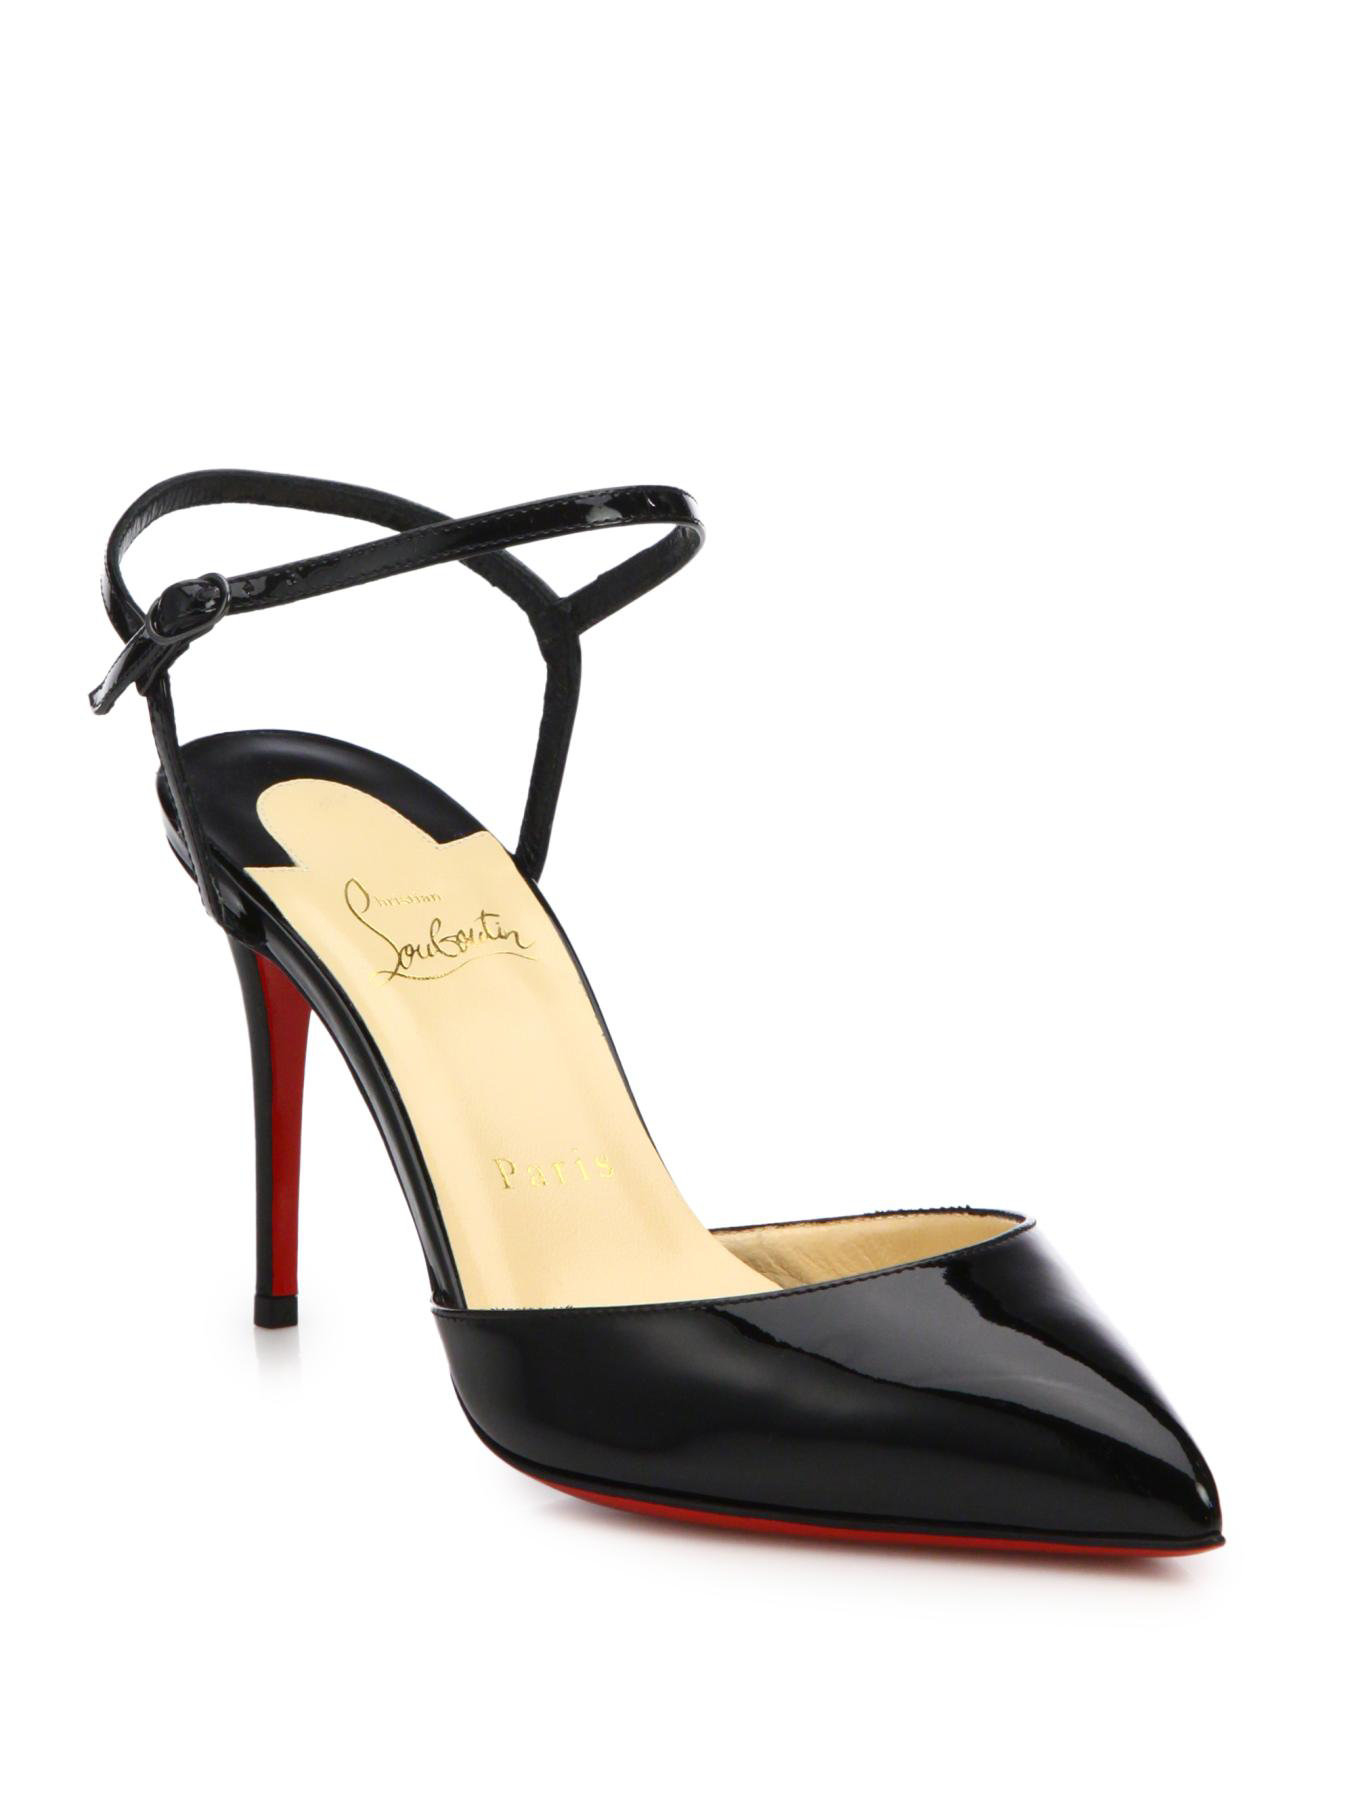 christian louboutin black patent leather ankle